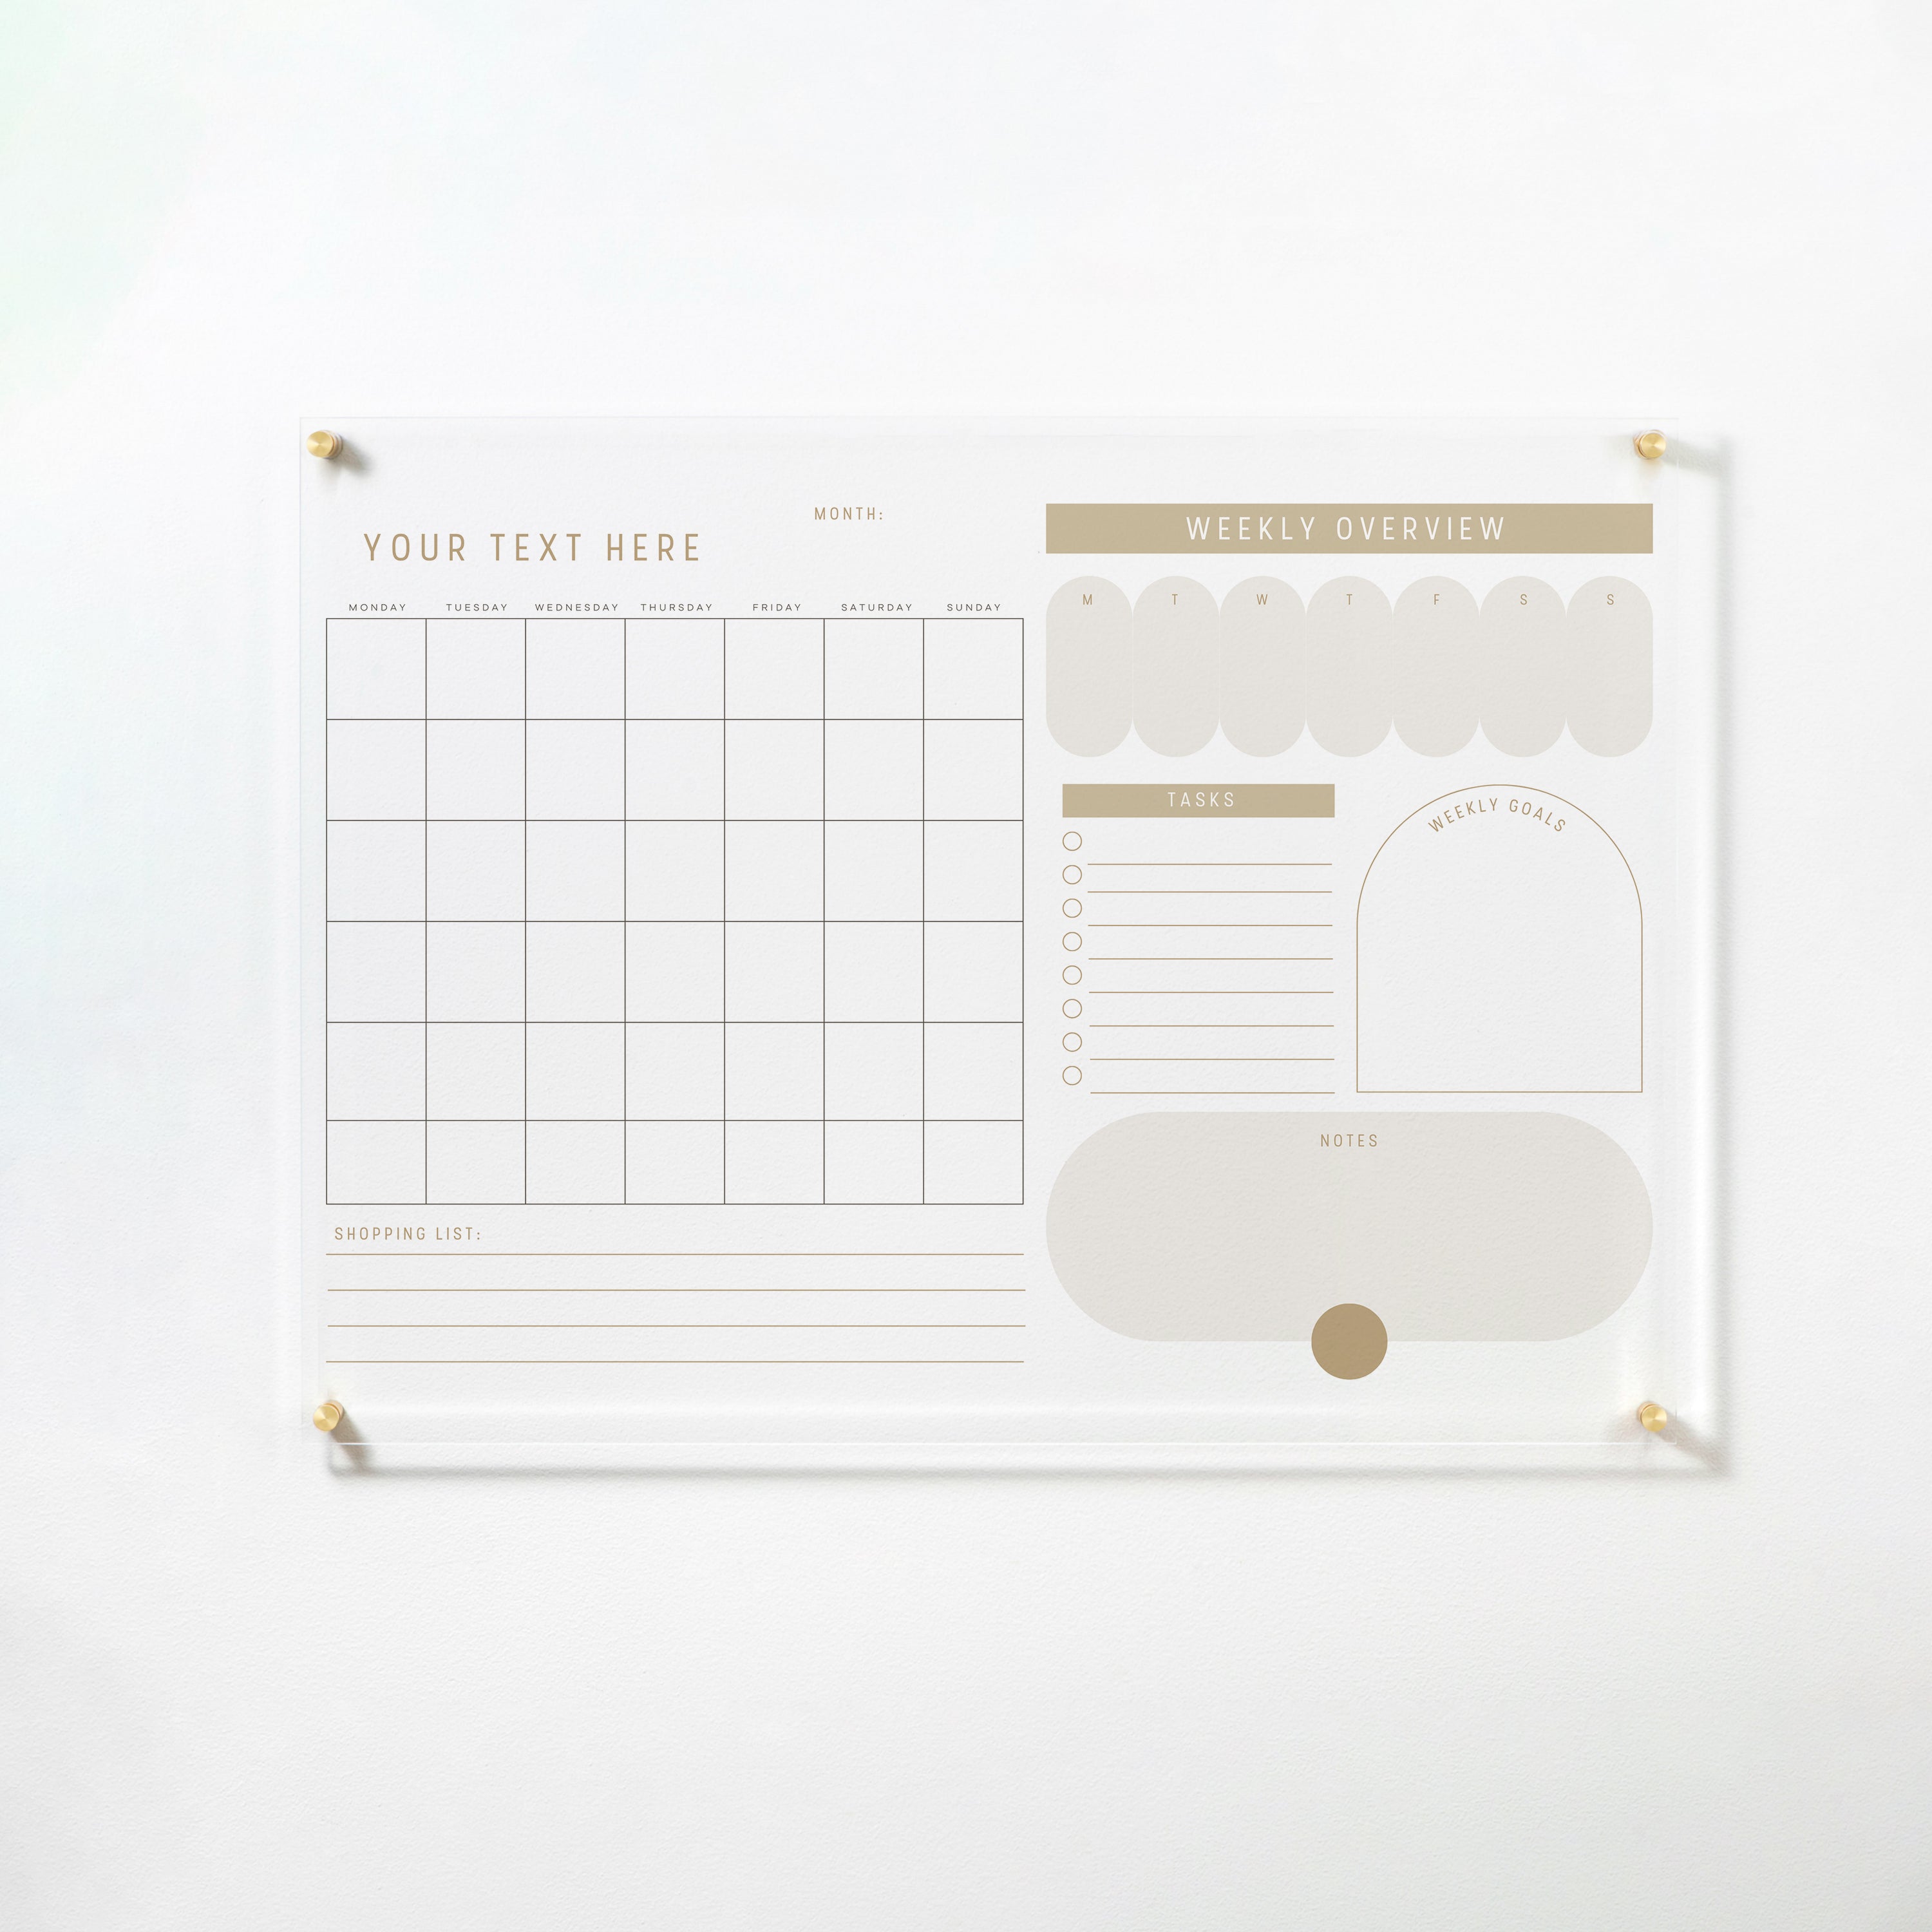 The "Custom Weekly Monthly Calendar - Whimsy" dry erase acrylic board mounted on a white wall with gold pins. It features a monthly calendar grid, "Weekly Overview," "Tasks," "Weekly Goals," and "Notes" sections in soft beige tones for a cohesive and stylish planning tool.